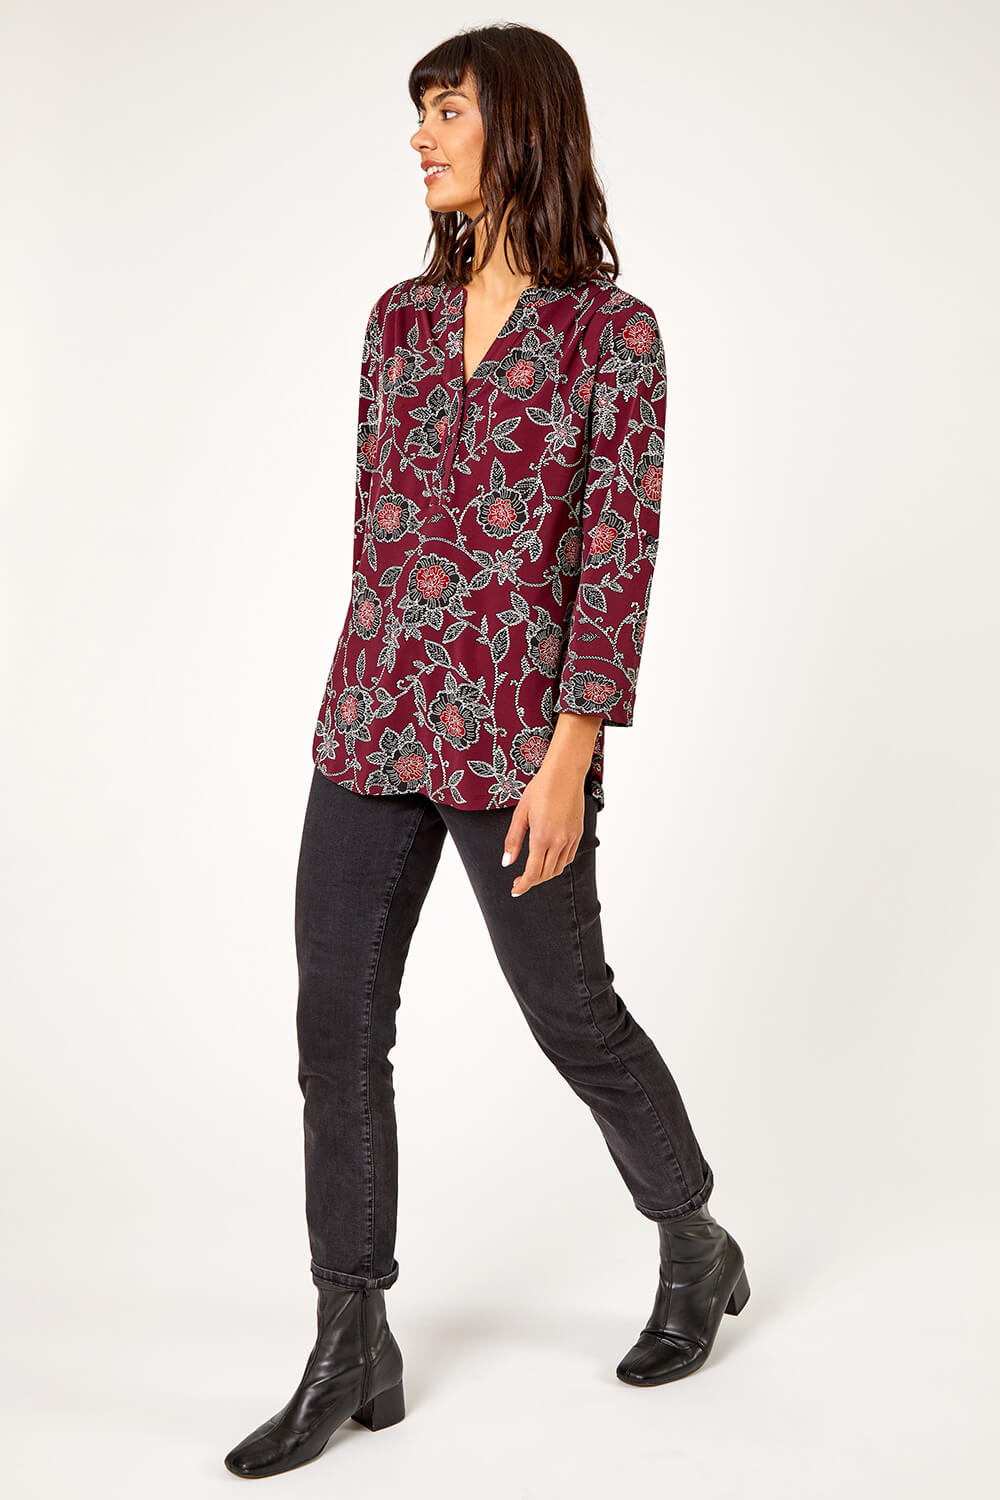 Wine Textured Floral Print Stretch Shirt , Image 3 of 5